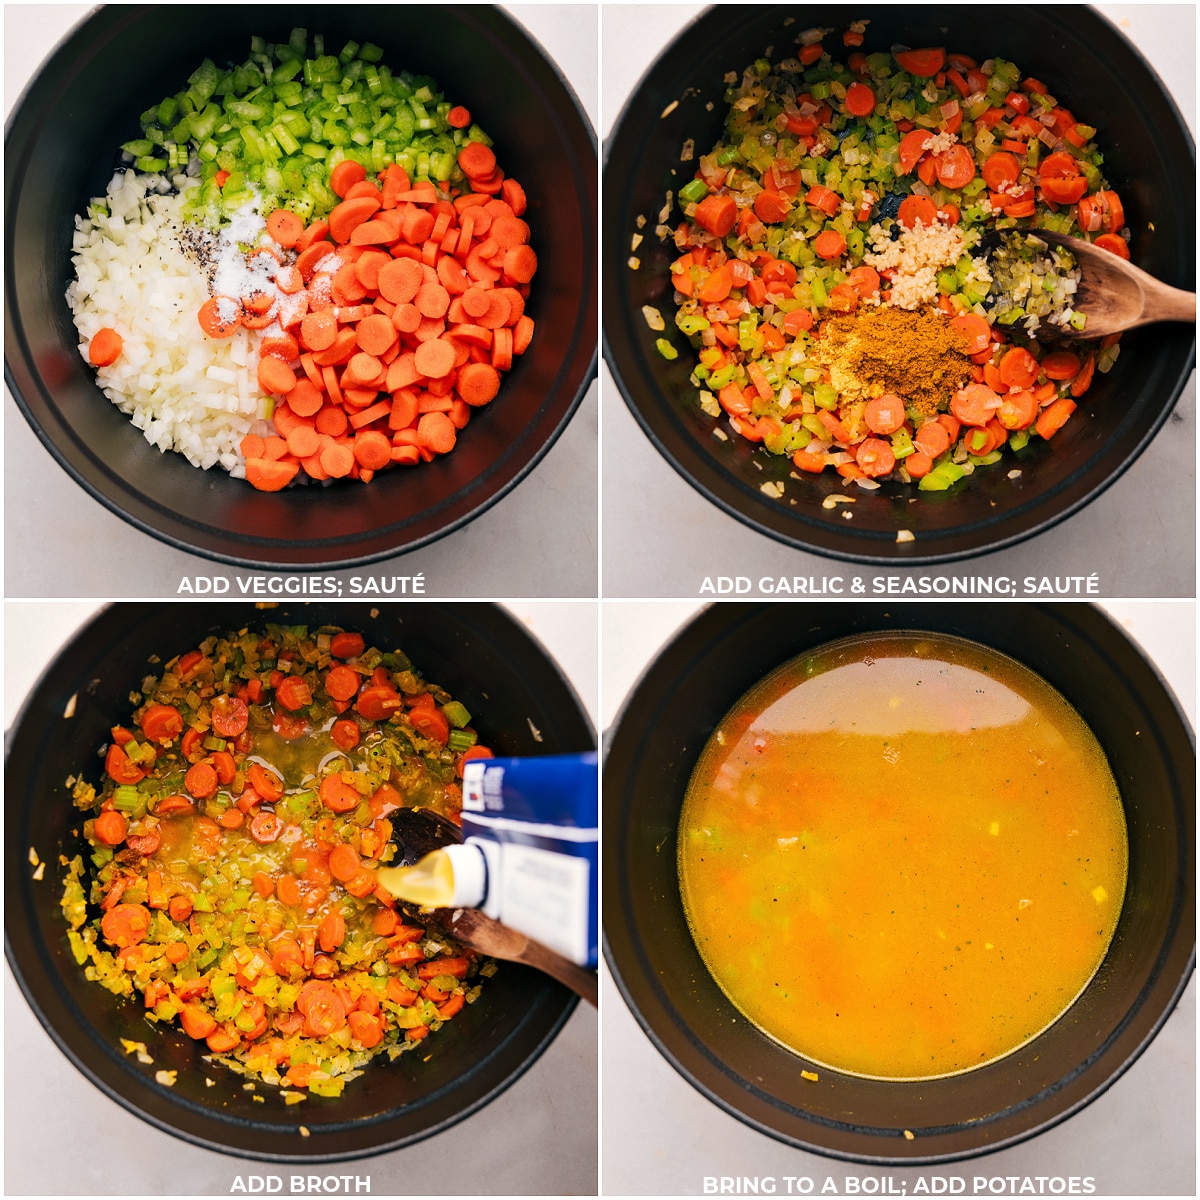 Adding vegetables to the pot and sautéing them, followed by adding seasonings and broth, bringing it to a boil, and adding potatoes.